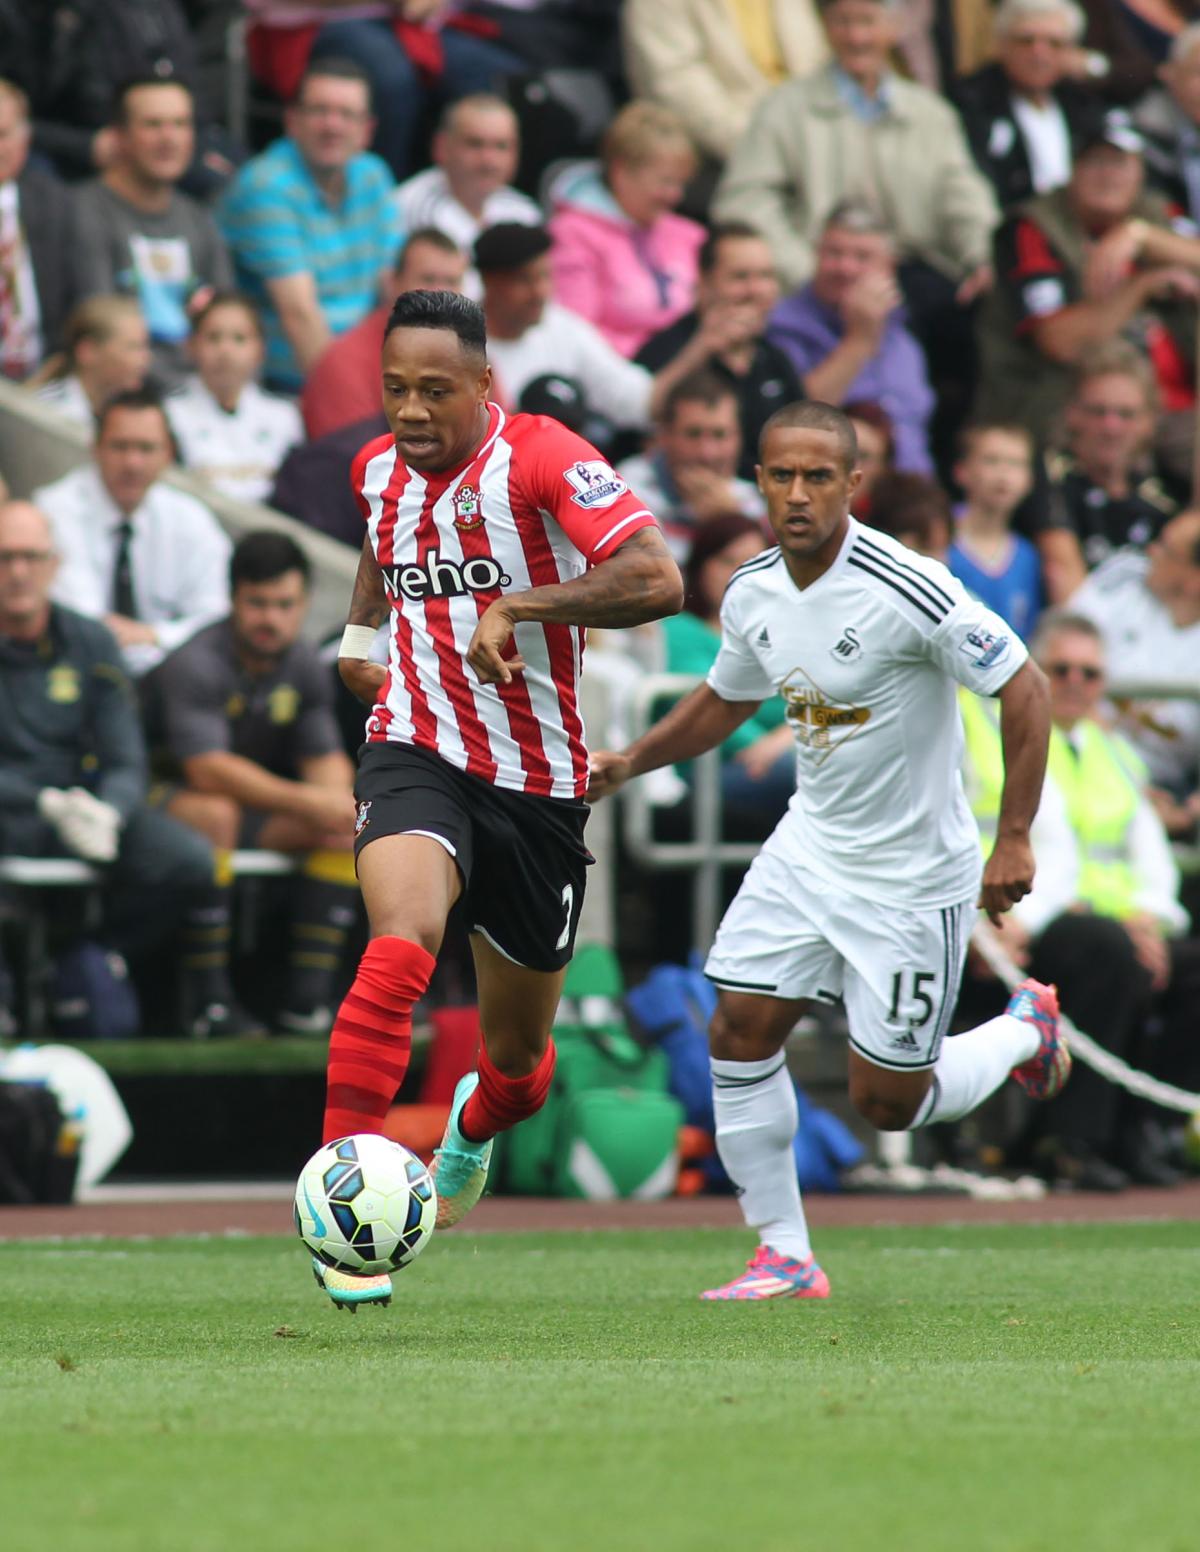 Pictures from the Barclay's Premier League match between Swansea City and Saints. The unauthorised downloading, editing, copying, or distribution of this image is strictly prohibited.